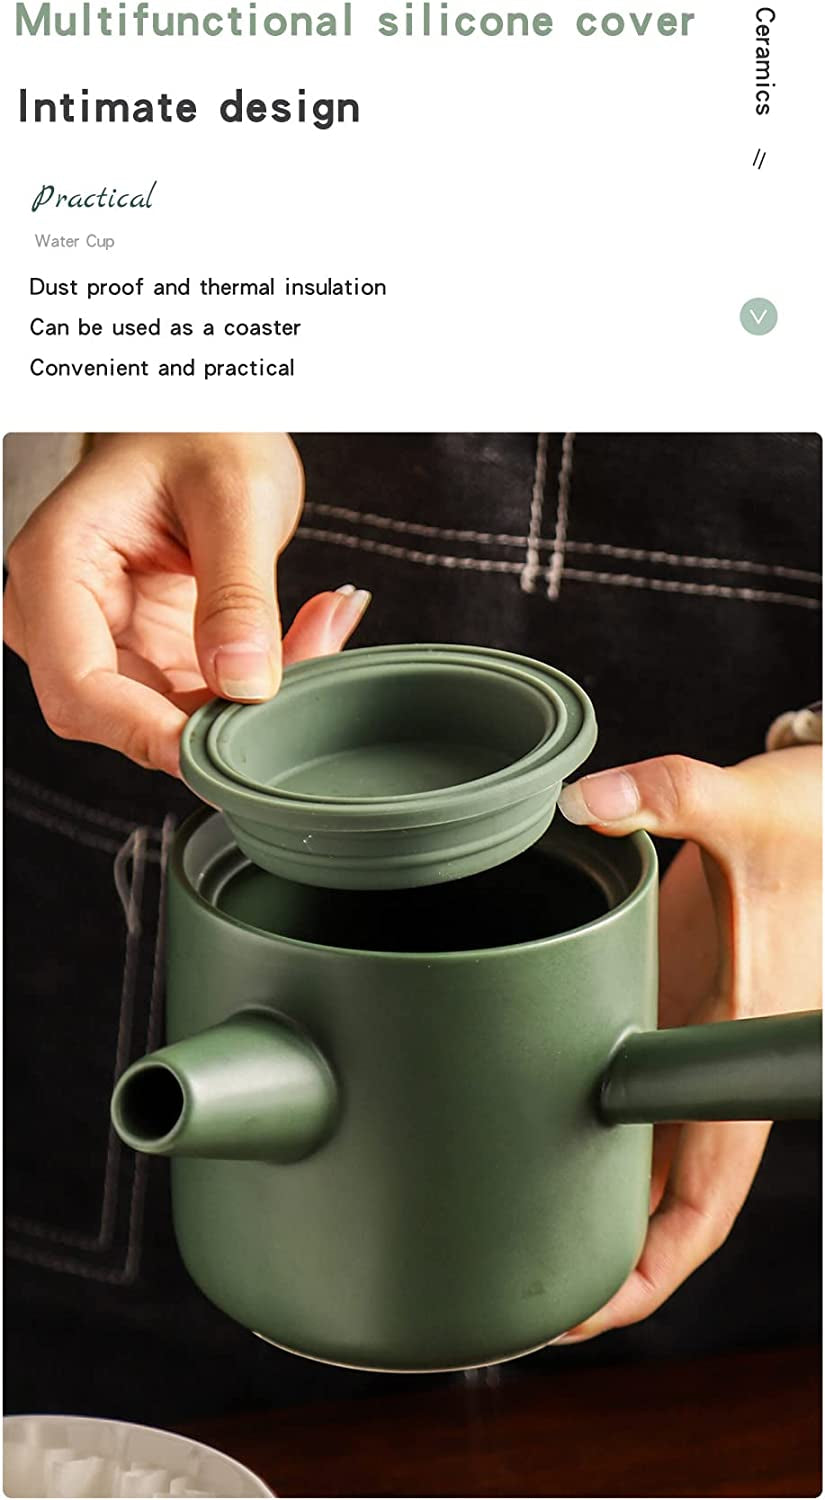 Premium Ceramic Pour Over Coffee Set in Green - Classic Design with Comfort Handle for Rich, Flavorful Coffee - About Brew